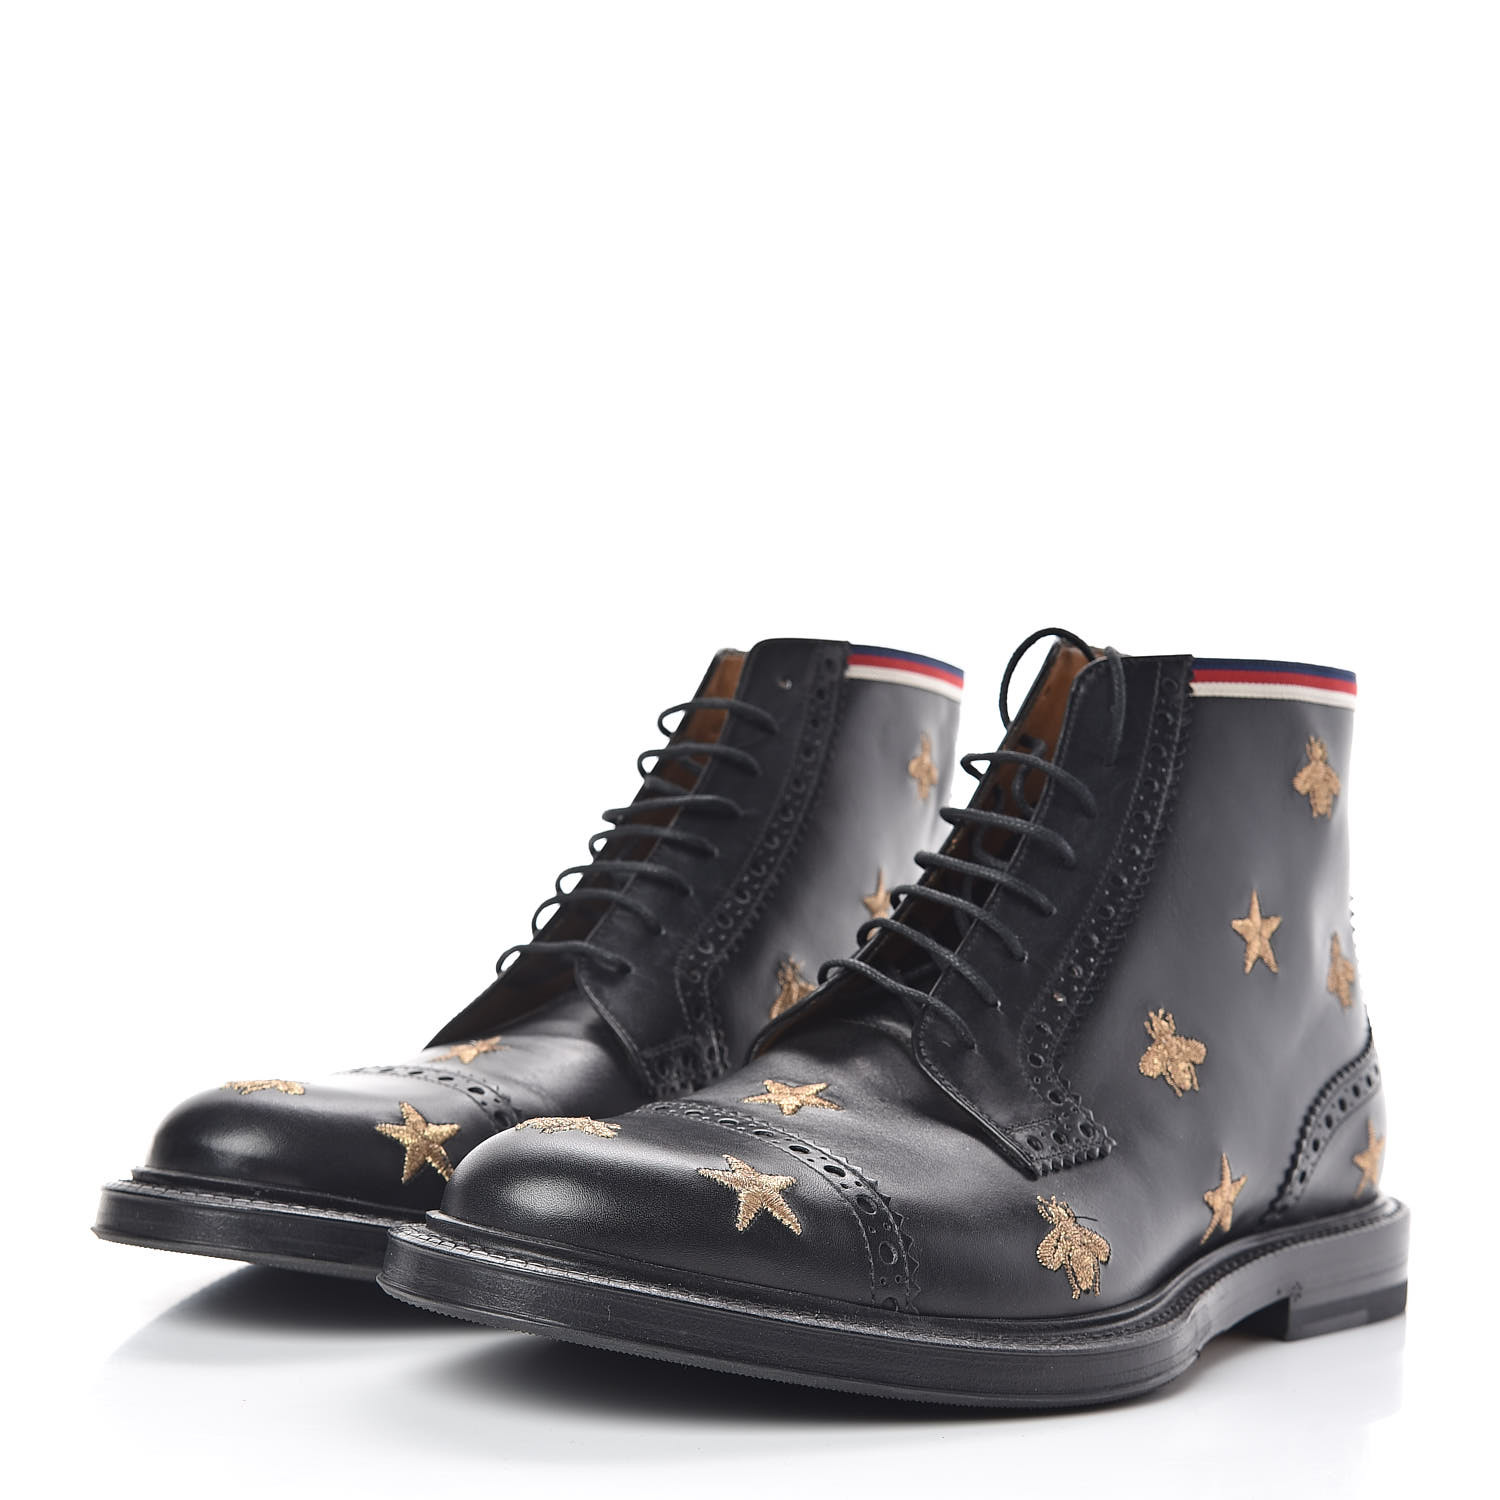 GUCCI Calfskin Embroidered Bee Star Mens Brogue Boots 7.5 Black 449658